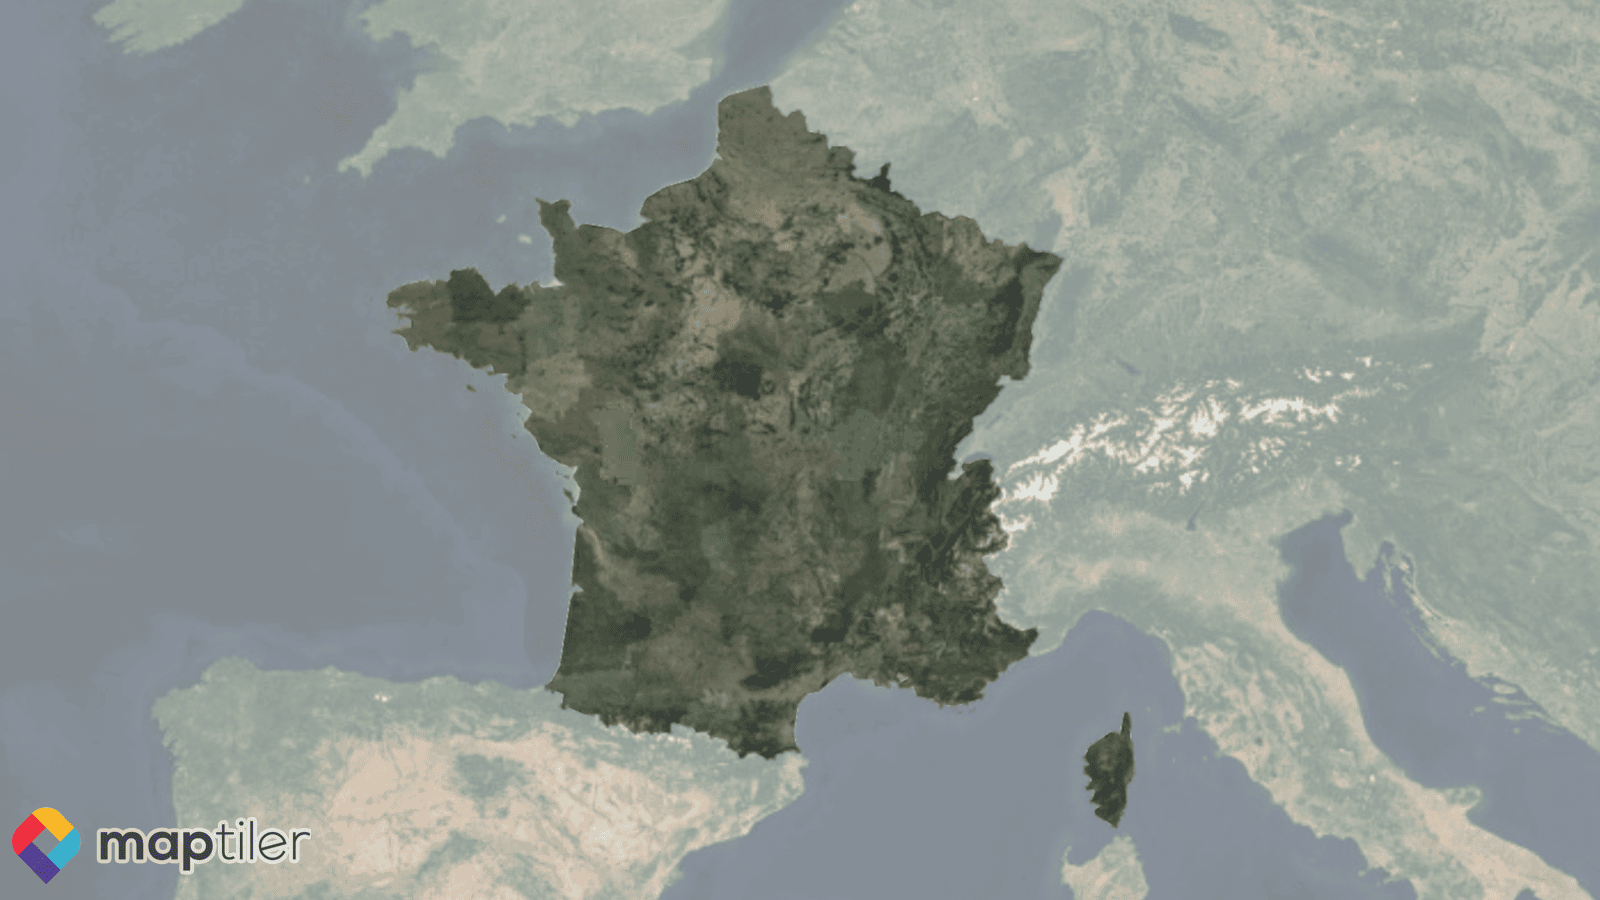 French aerial imagery available via API for developers